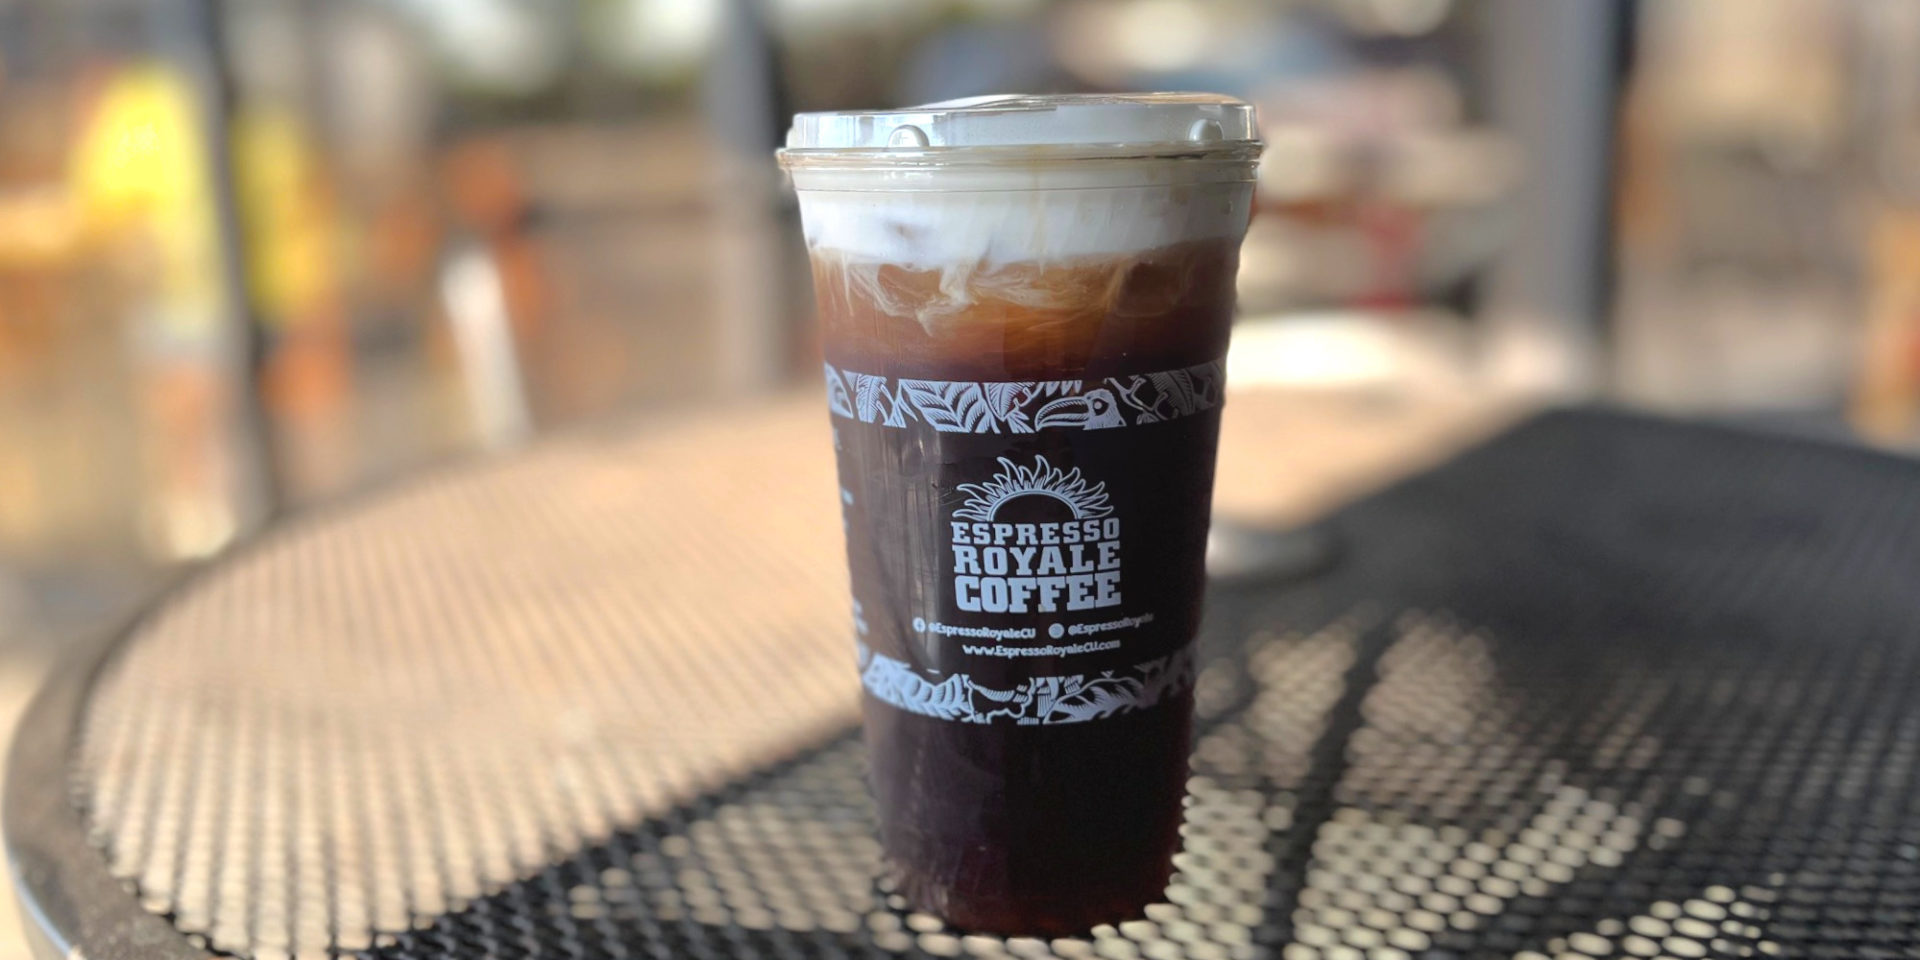 Espresso Royale at Stadium Plaza's Americano with cold foam is in a to-go cup with the coffee shop's logo on the outside on a black patio table outside the coffee shop in Champaign. Photo by Alyssa Buckley.